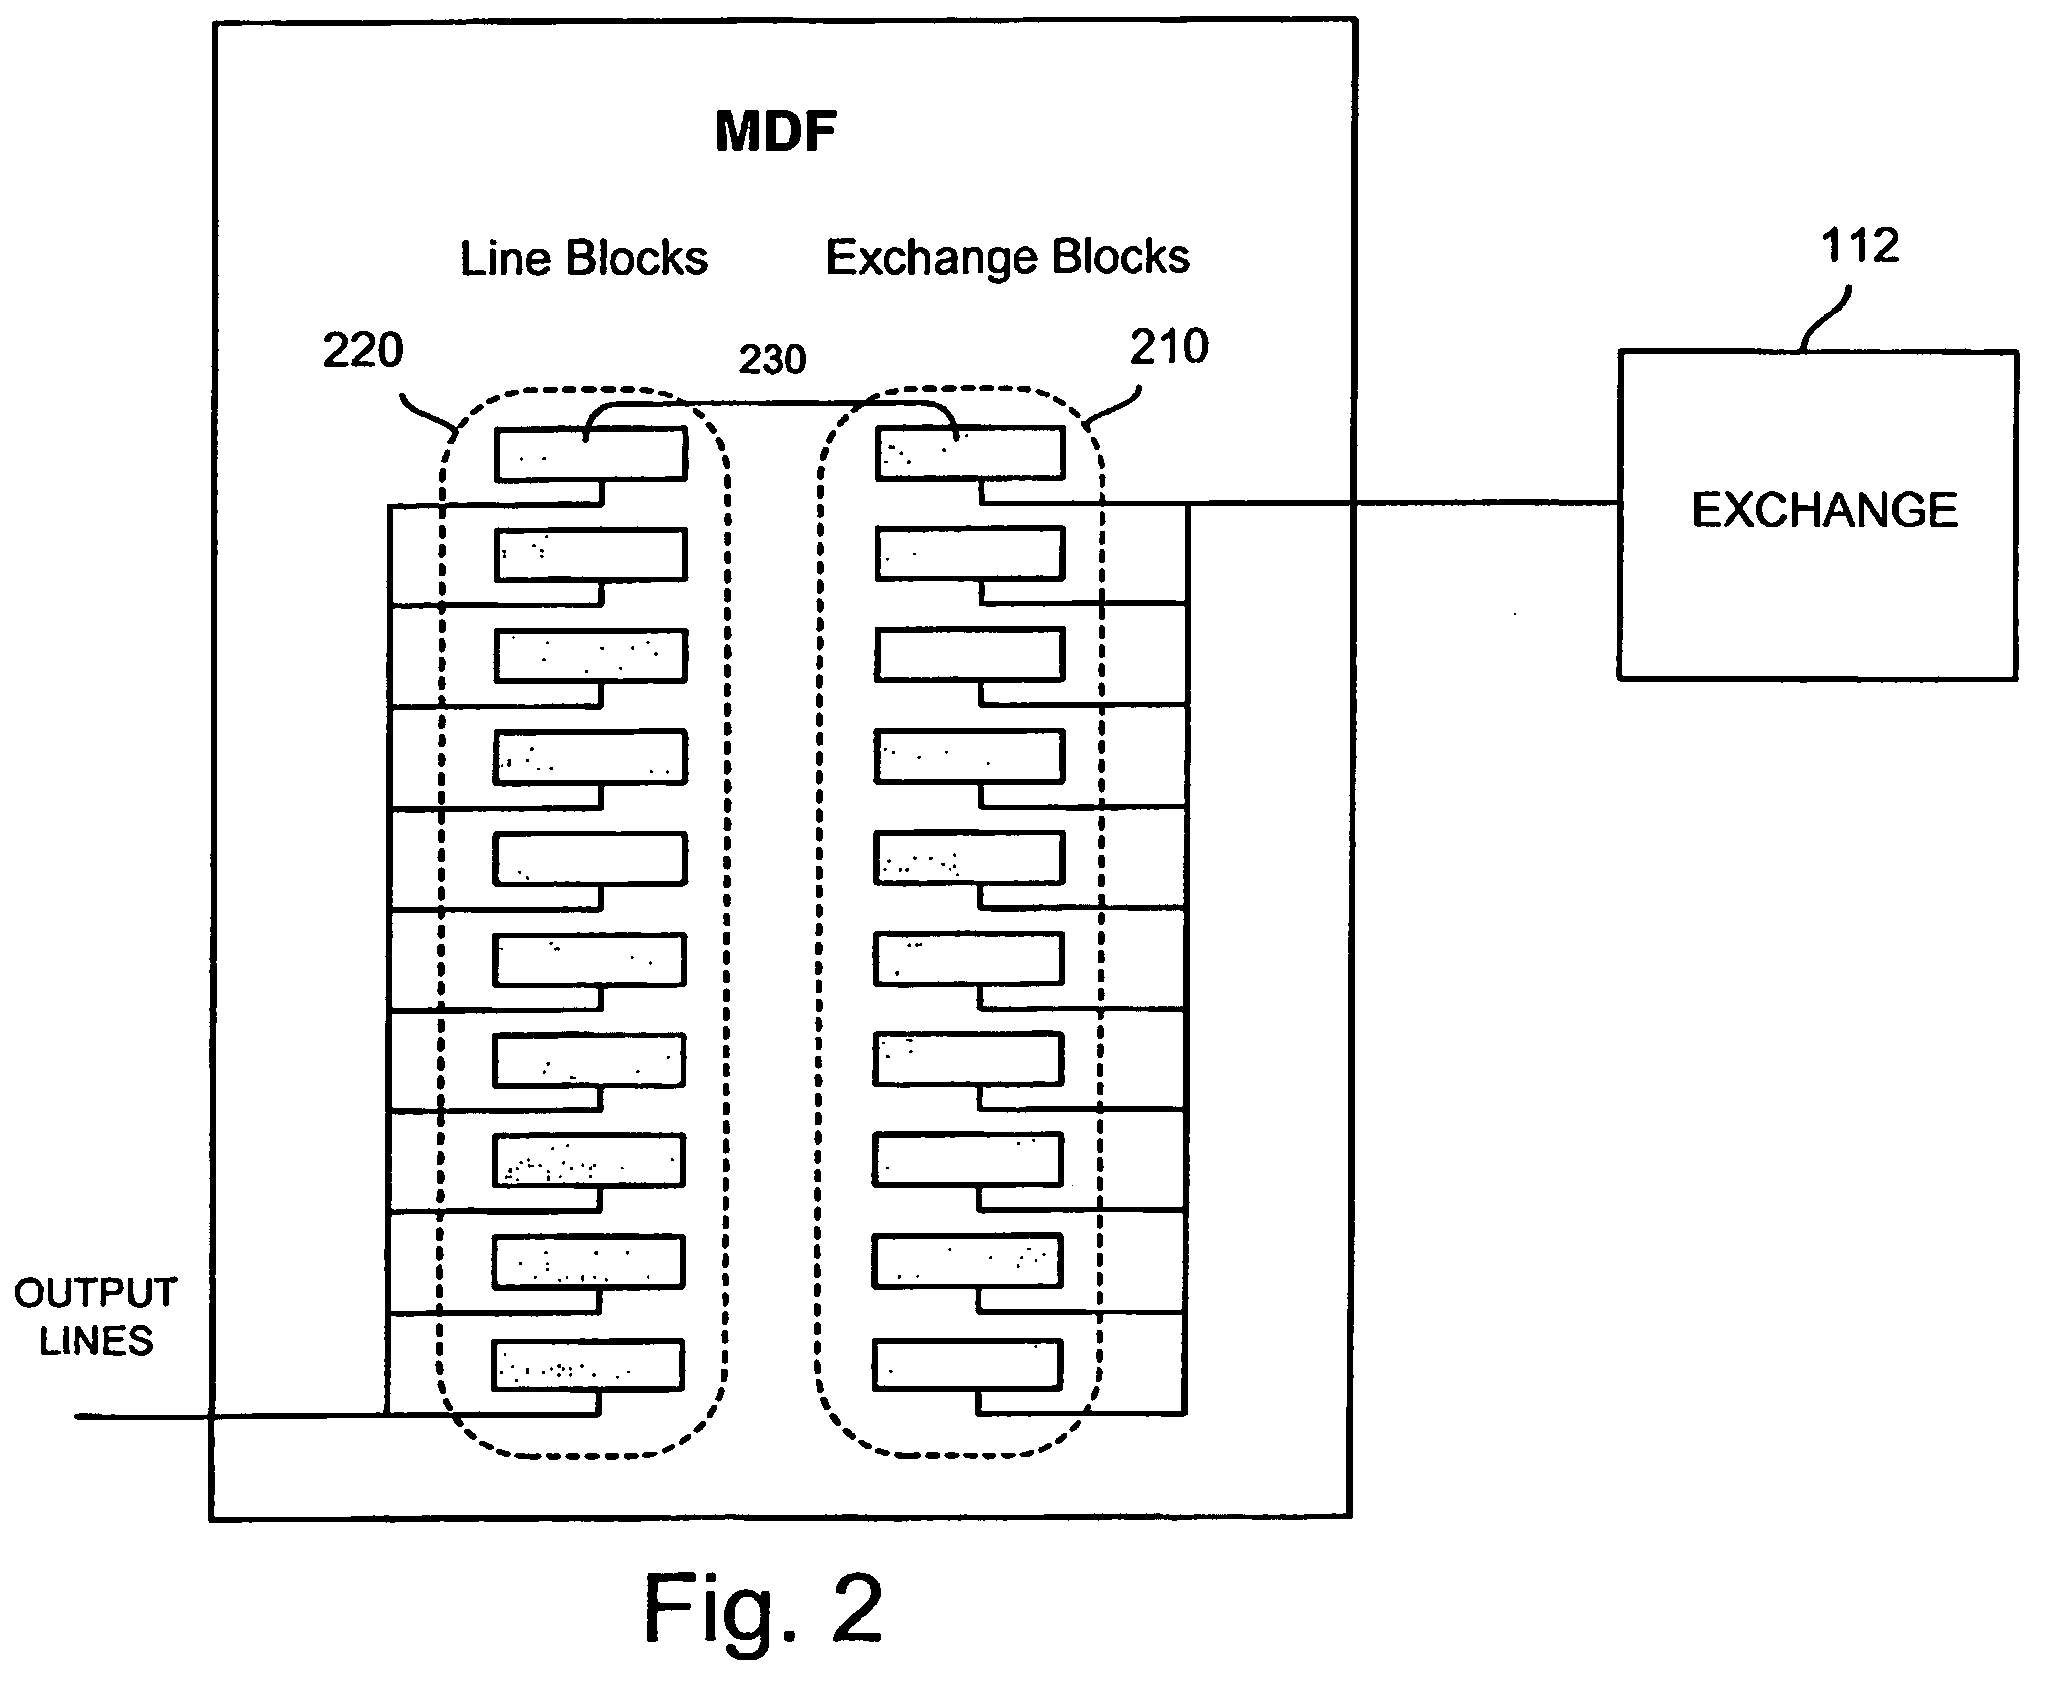 Method and System for Remotely  Automating Cross-Connnects in Telecom Networks